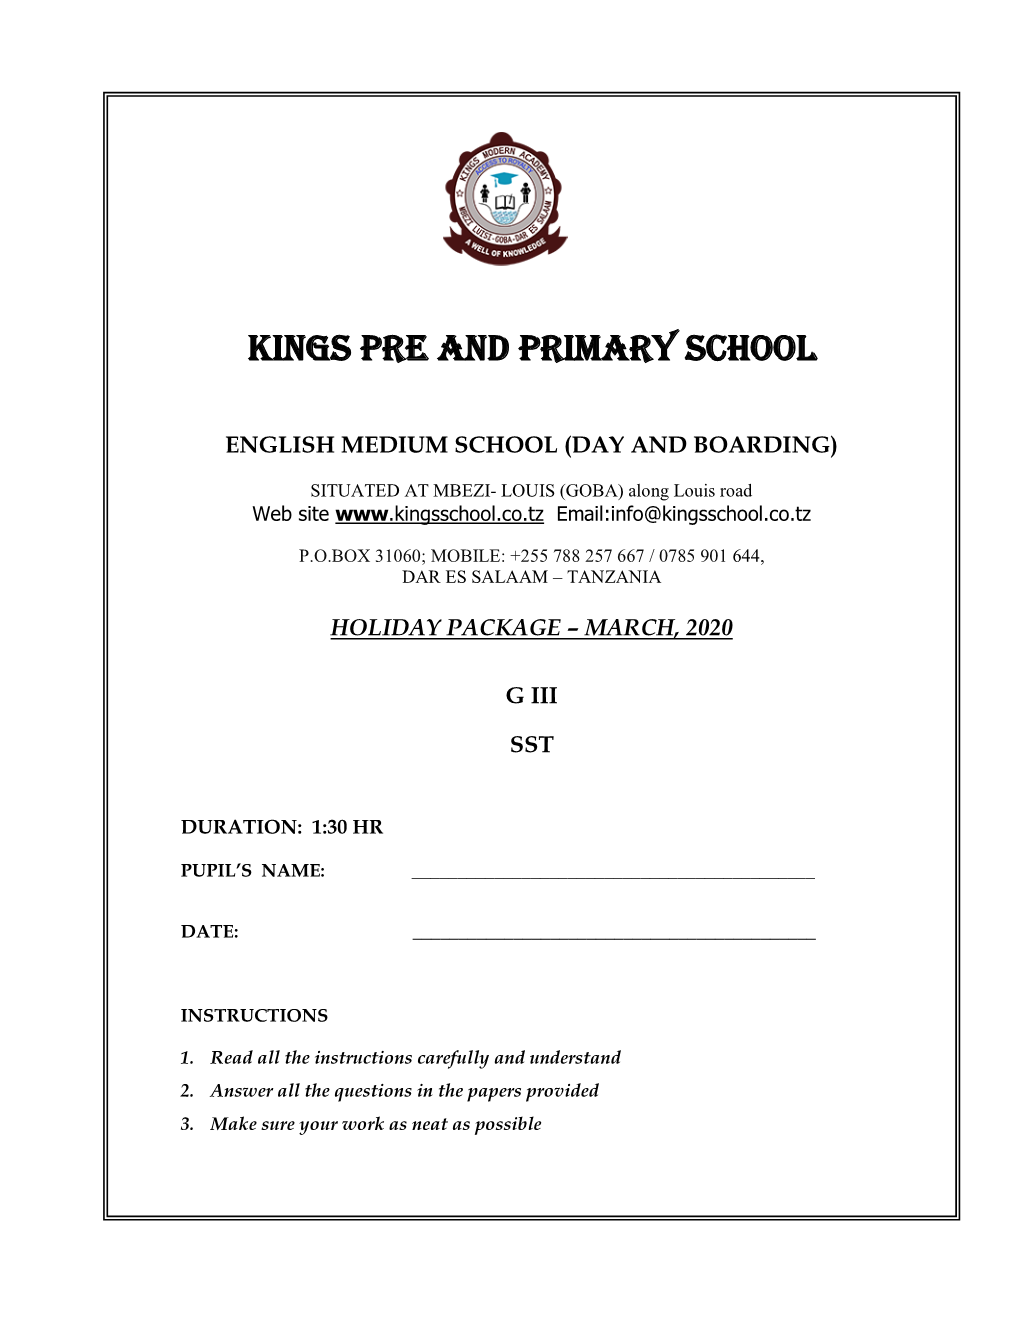 Kings Pre and Primary School